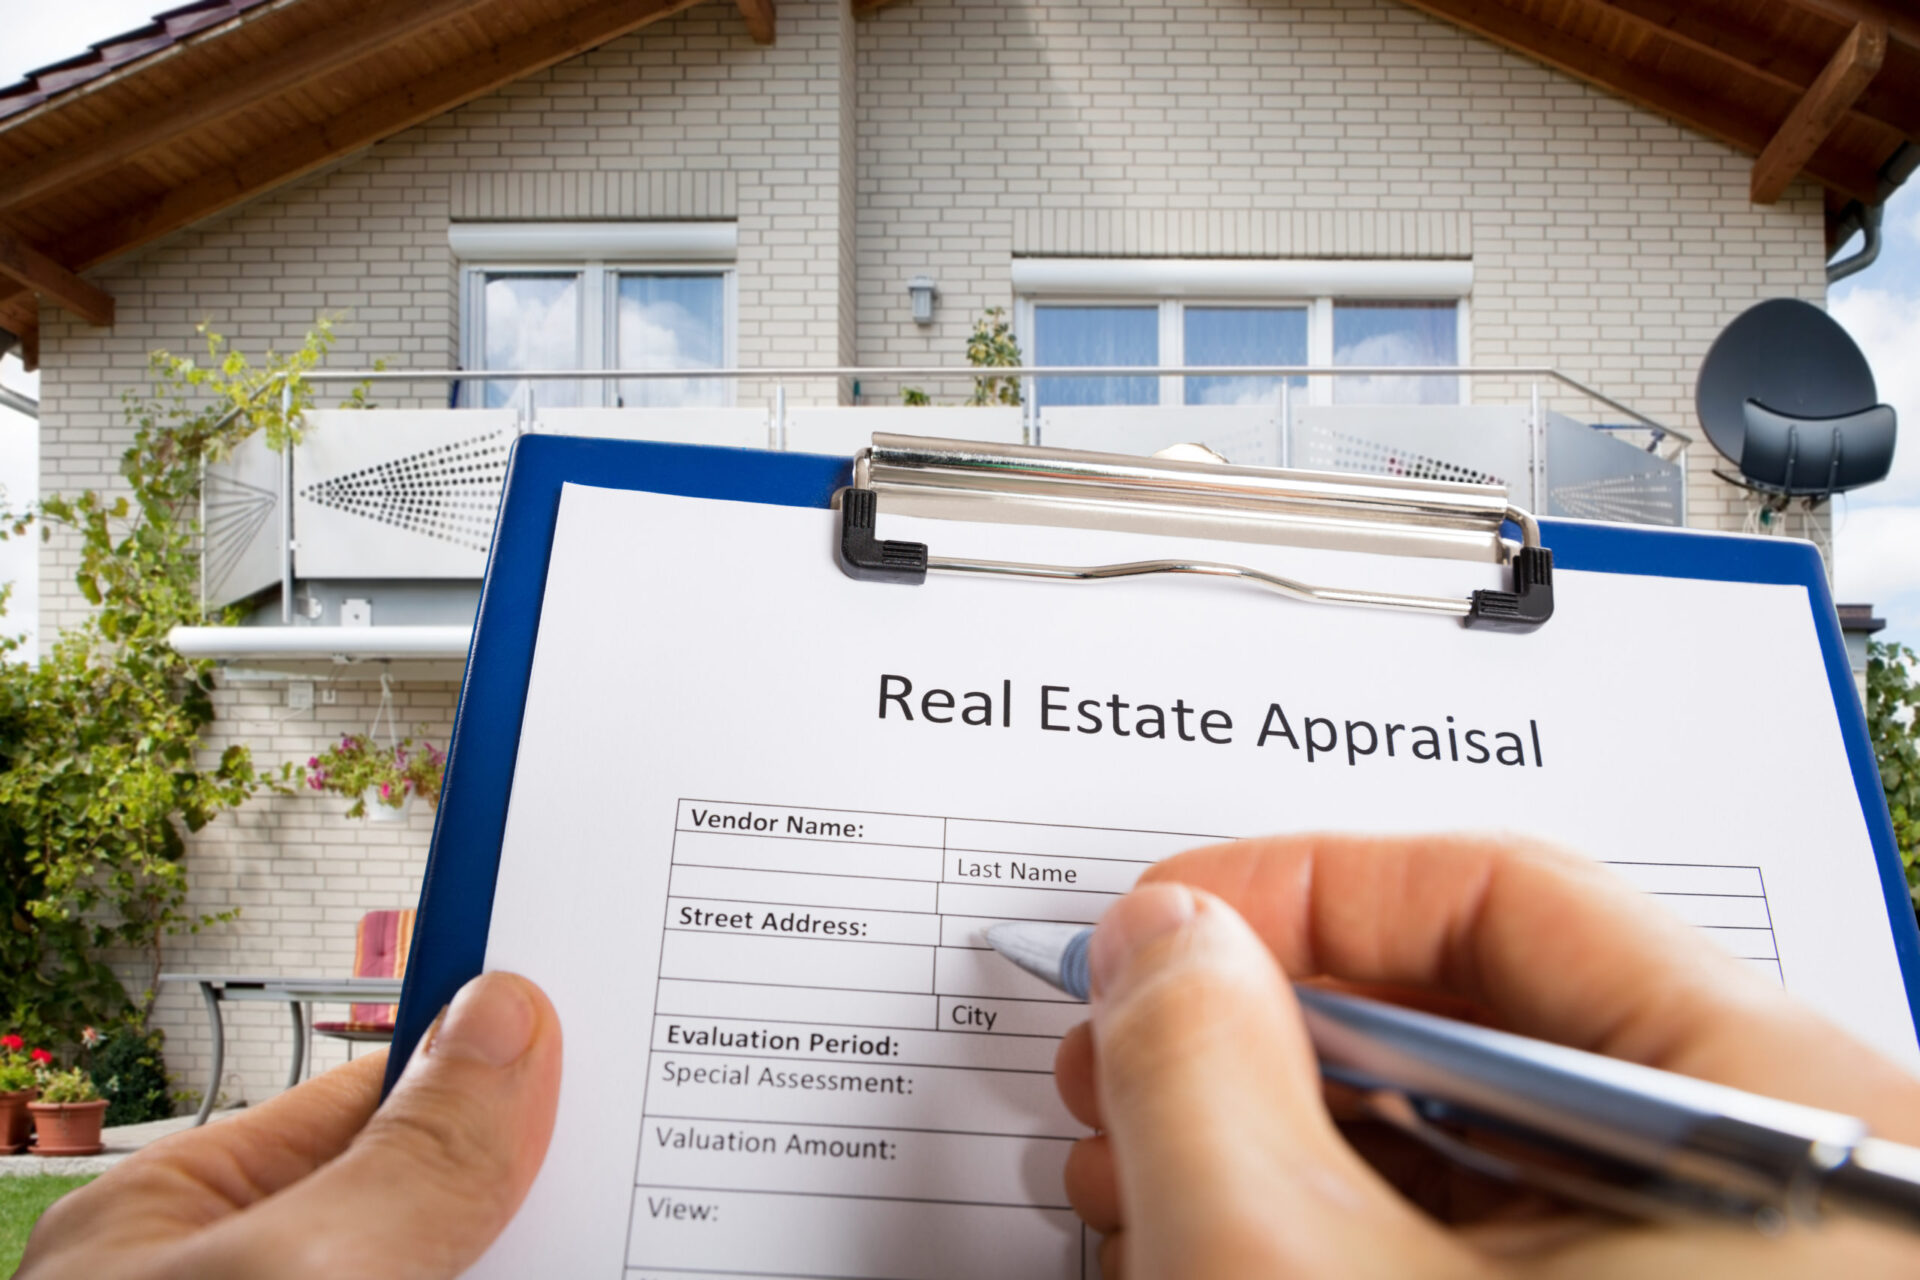 What to Expect During Your Home Appraisal